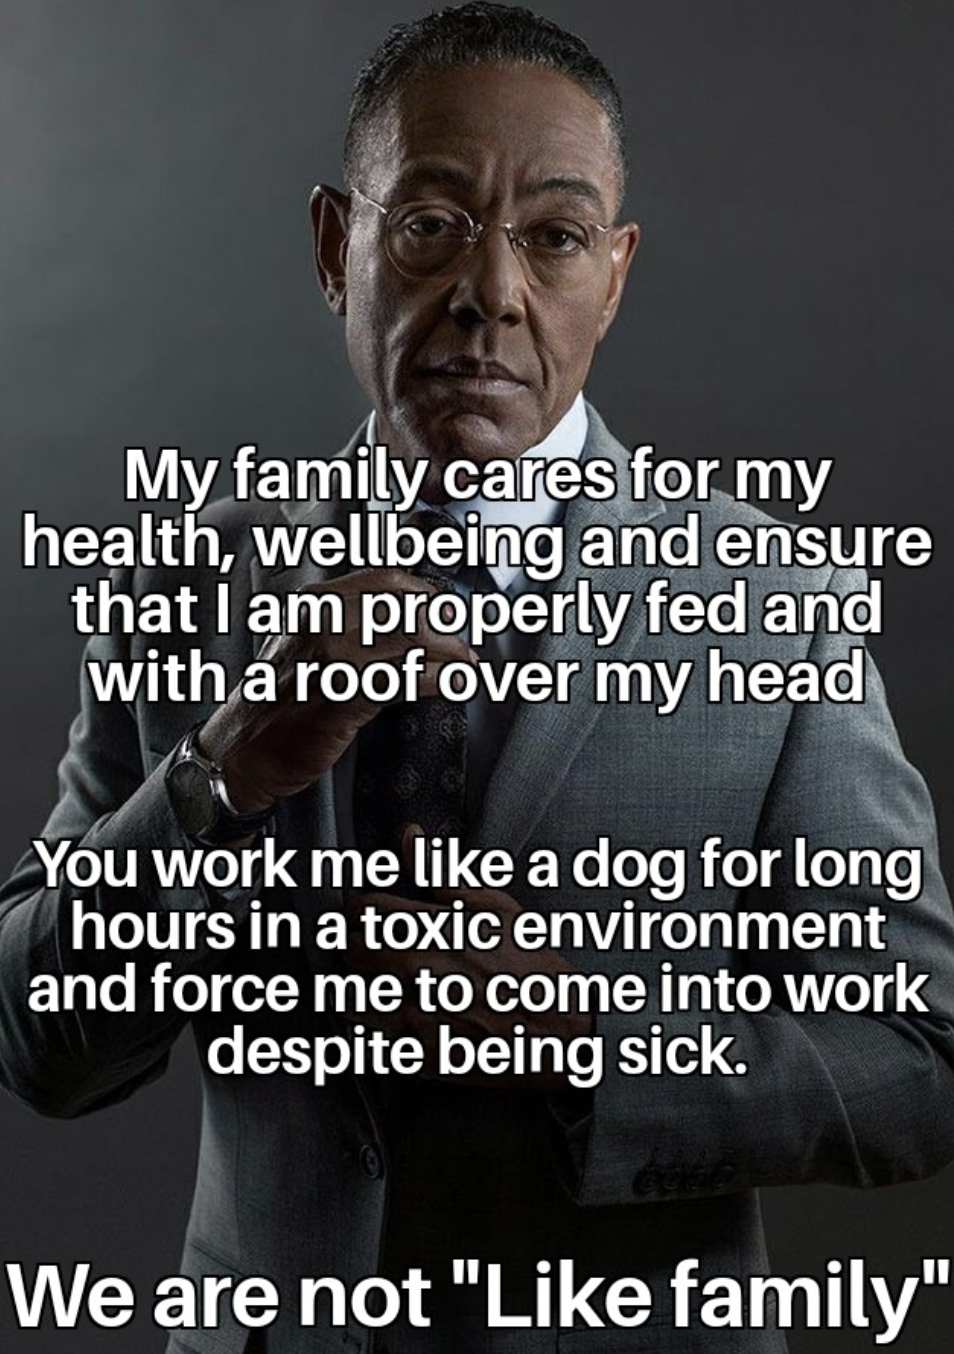 photo caption - My family cares for my health, wellbeing and ensure that I am properly fed and with a roof over my head You work me a dog for long hours in a toxic environment and force me to come into work despite being sick. We are not " family"